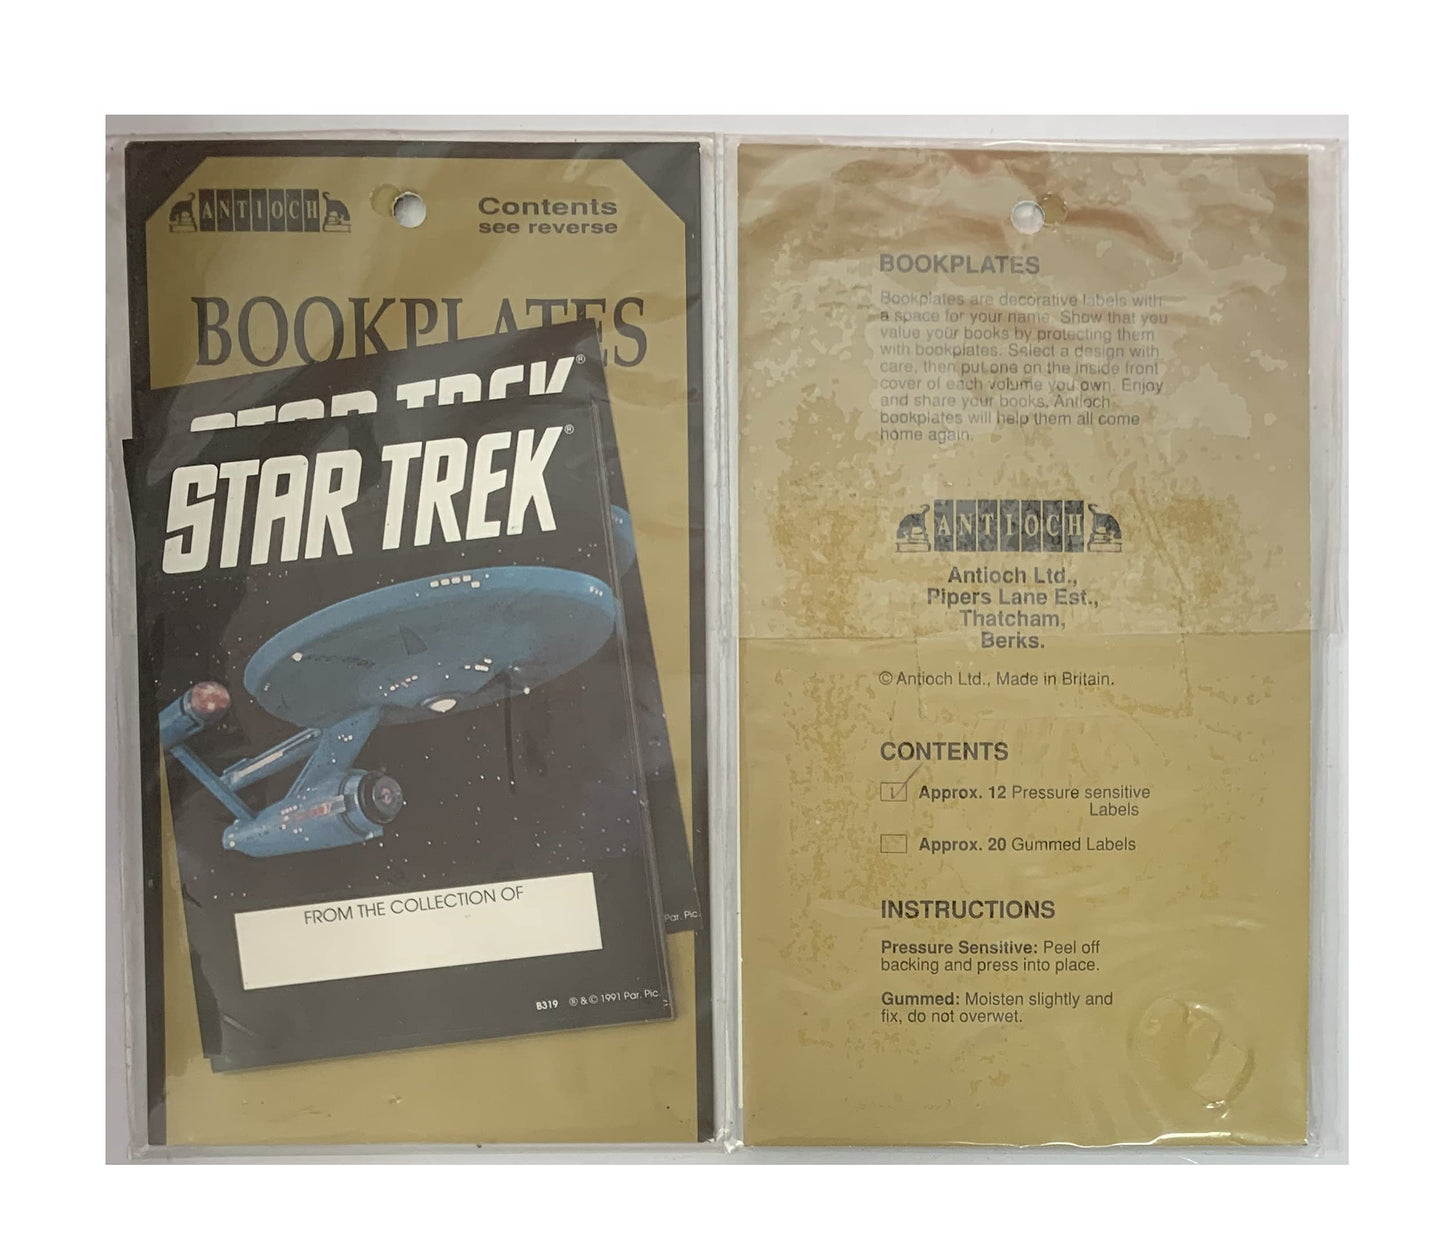 Vintage 1993 Antioch USS Enterprise NCC-1701 Star Ship Self Adhesive Bookplates Pack Of 12 - Brand New Factory Sealed Shop Stock Room Find